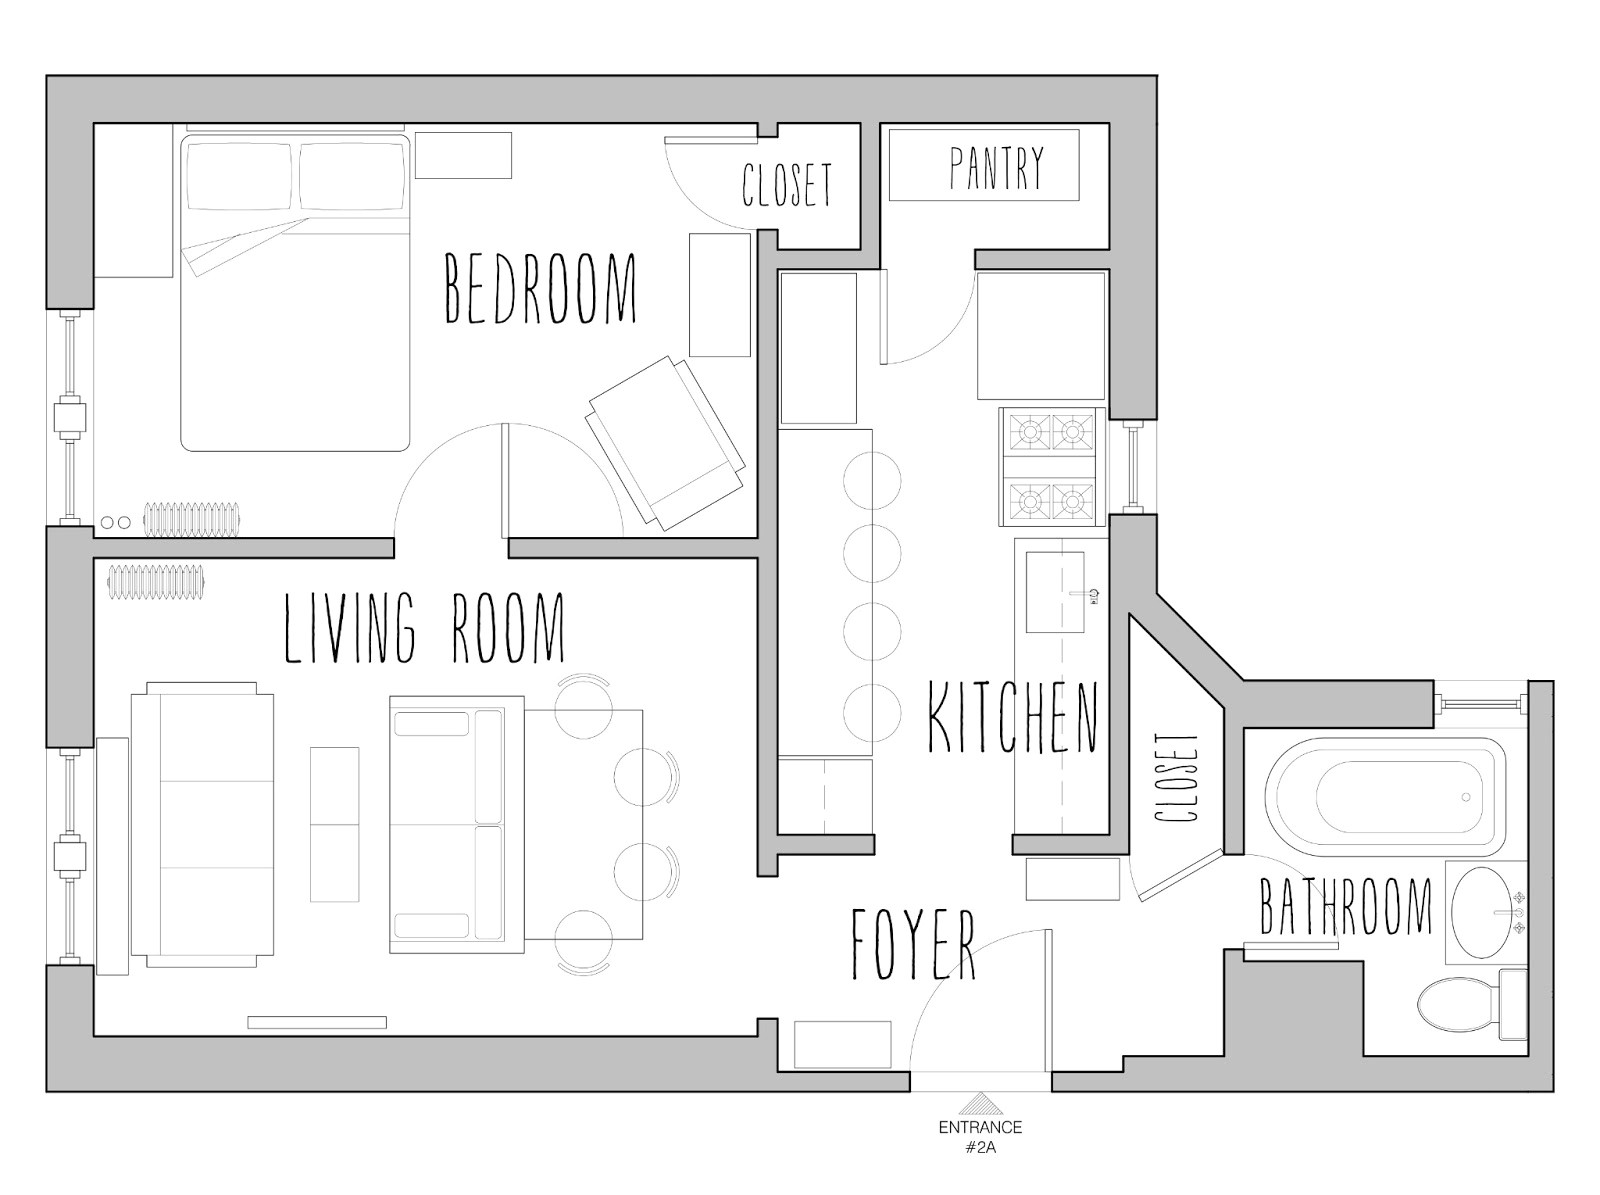 Small Home Floor Plans Under00 Sq Ft Small House Floor Plans Under 500 Sq Ft Cottage House Plans